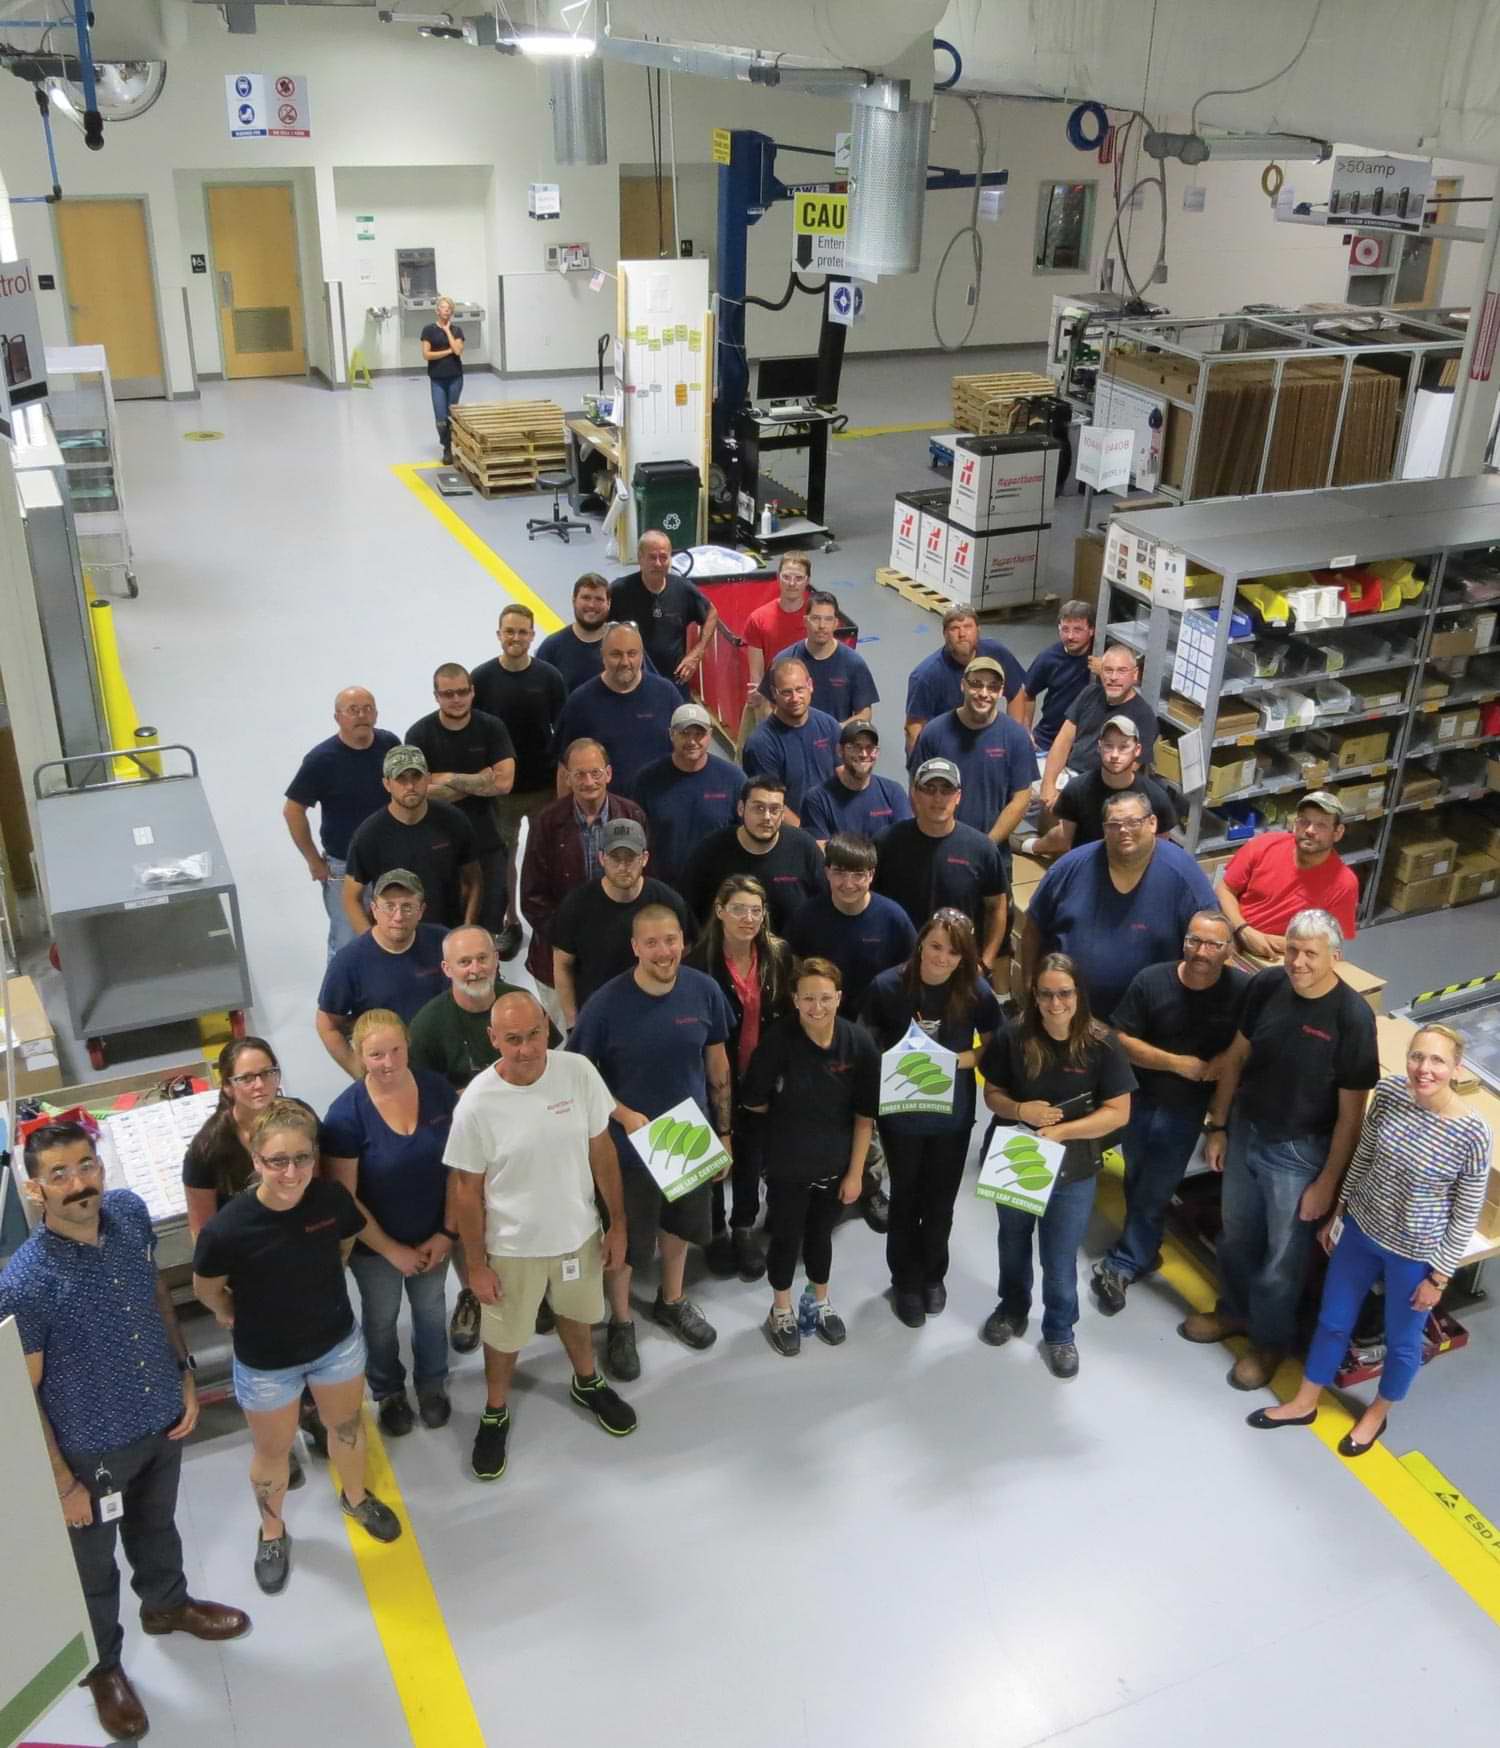 Hypertherm employees stand in together for a group photo inside a factory